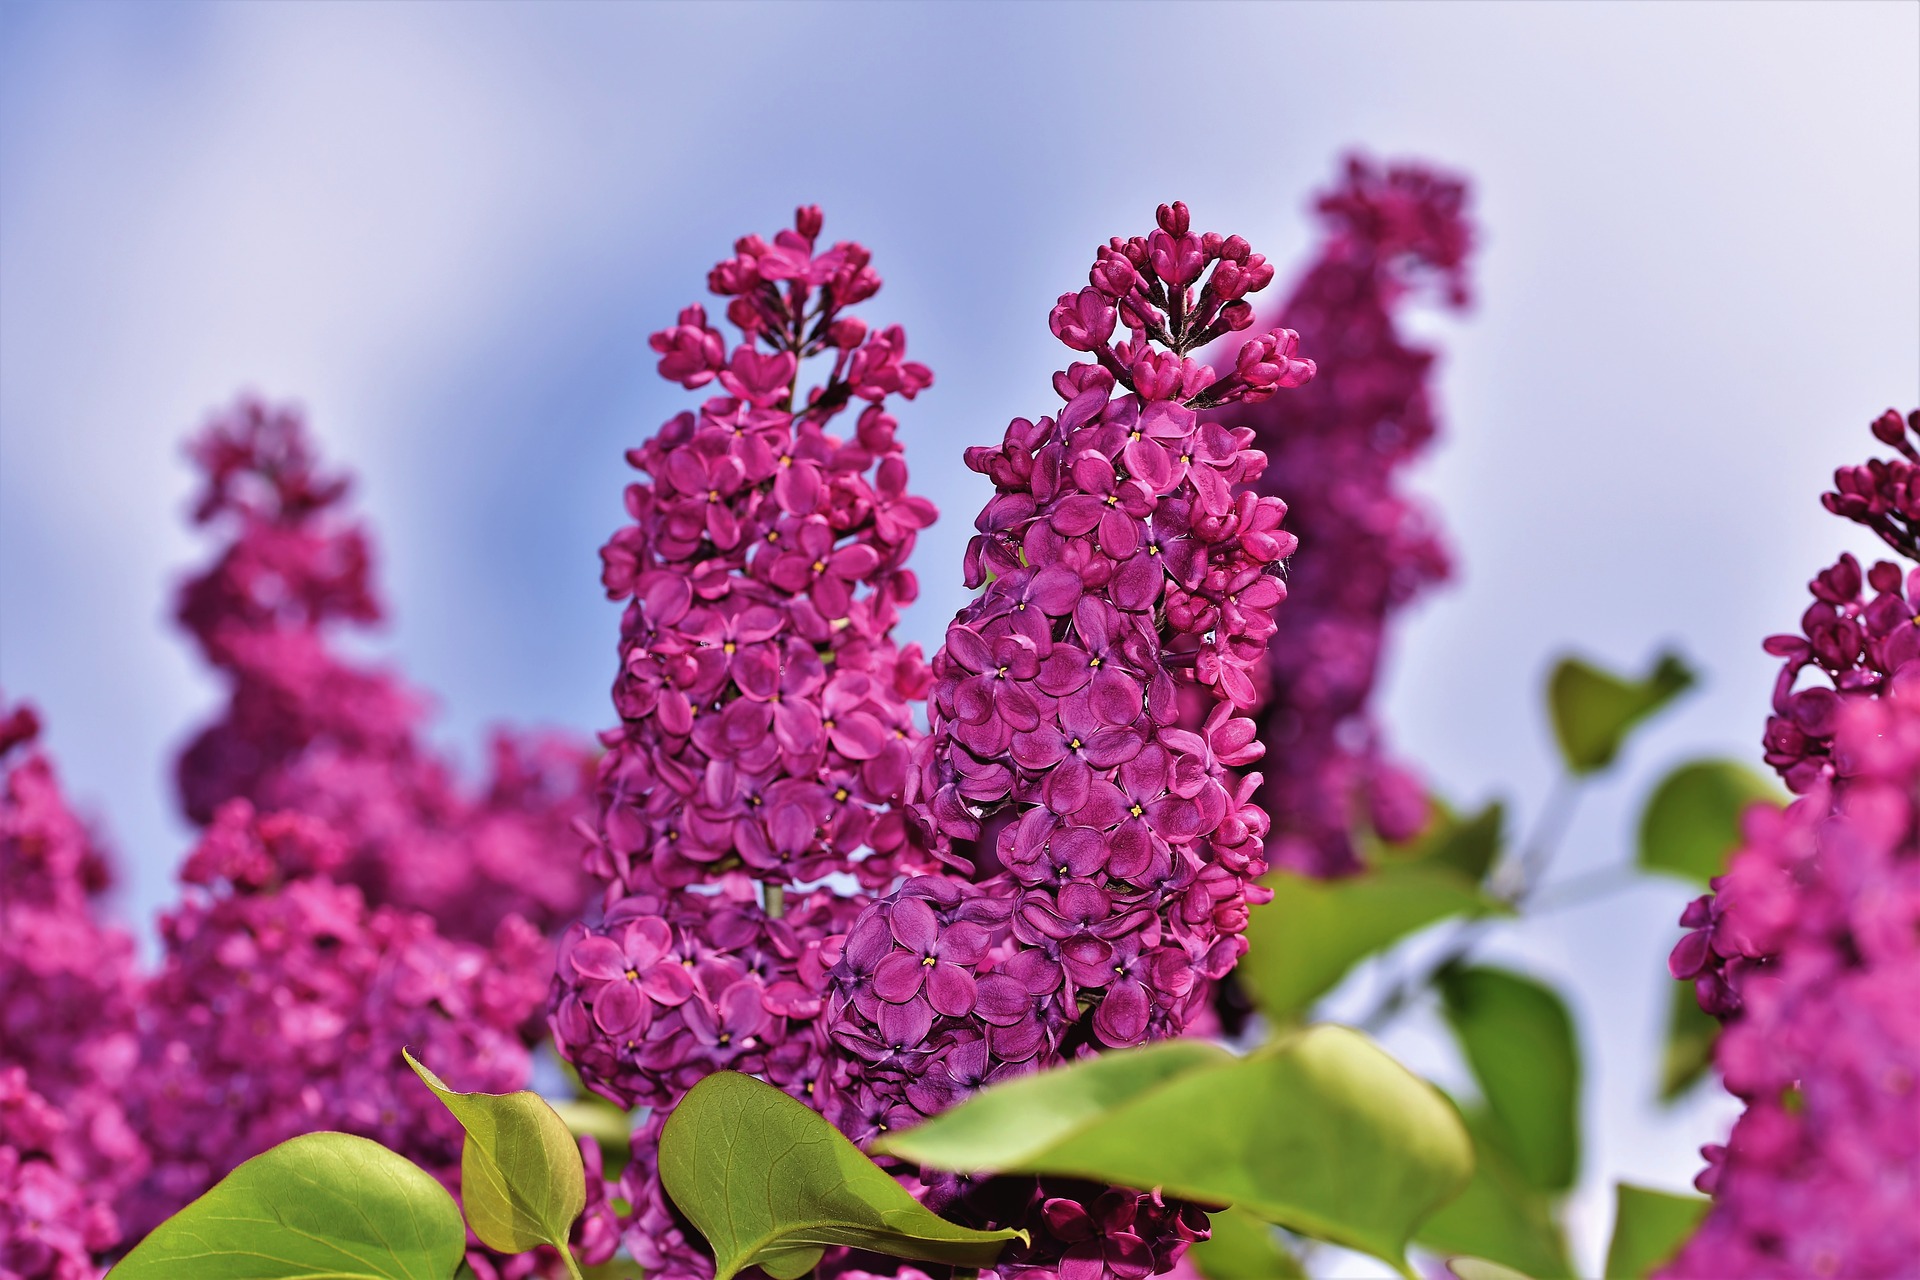 “April is the cruellest month breeding lilacs out of the dead land”